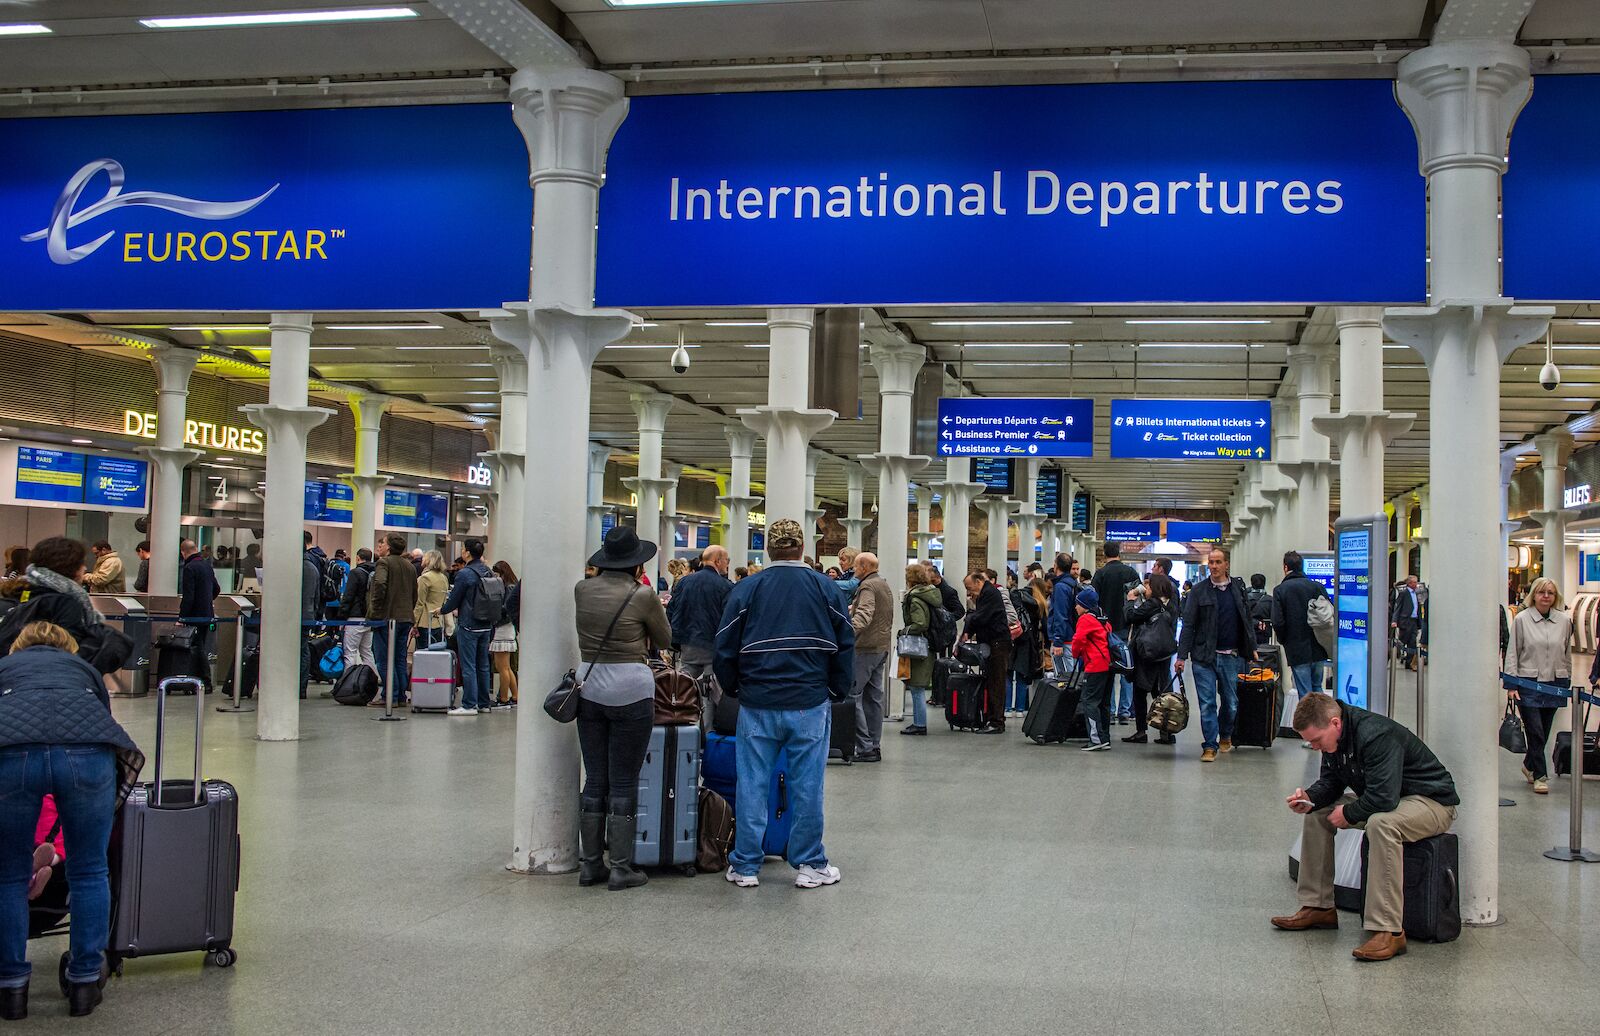 London to Brussels train: departure desk at St. Pancras International in London